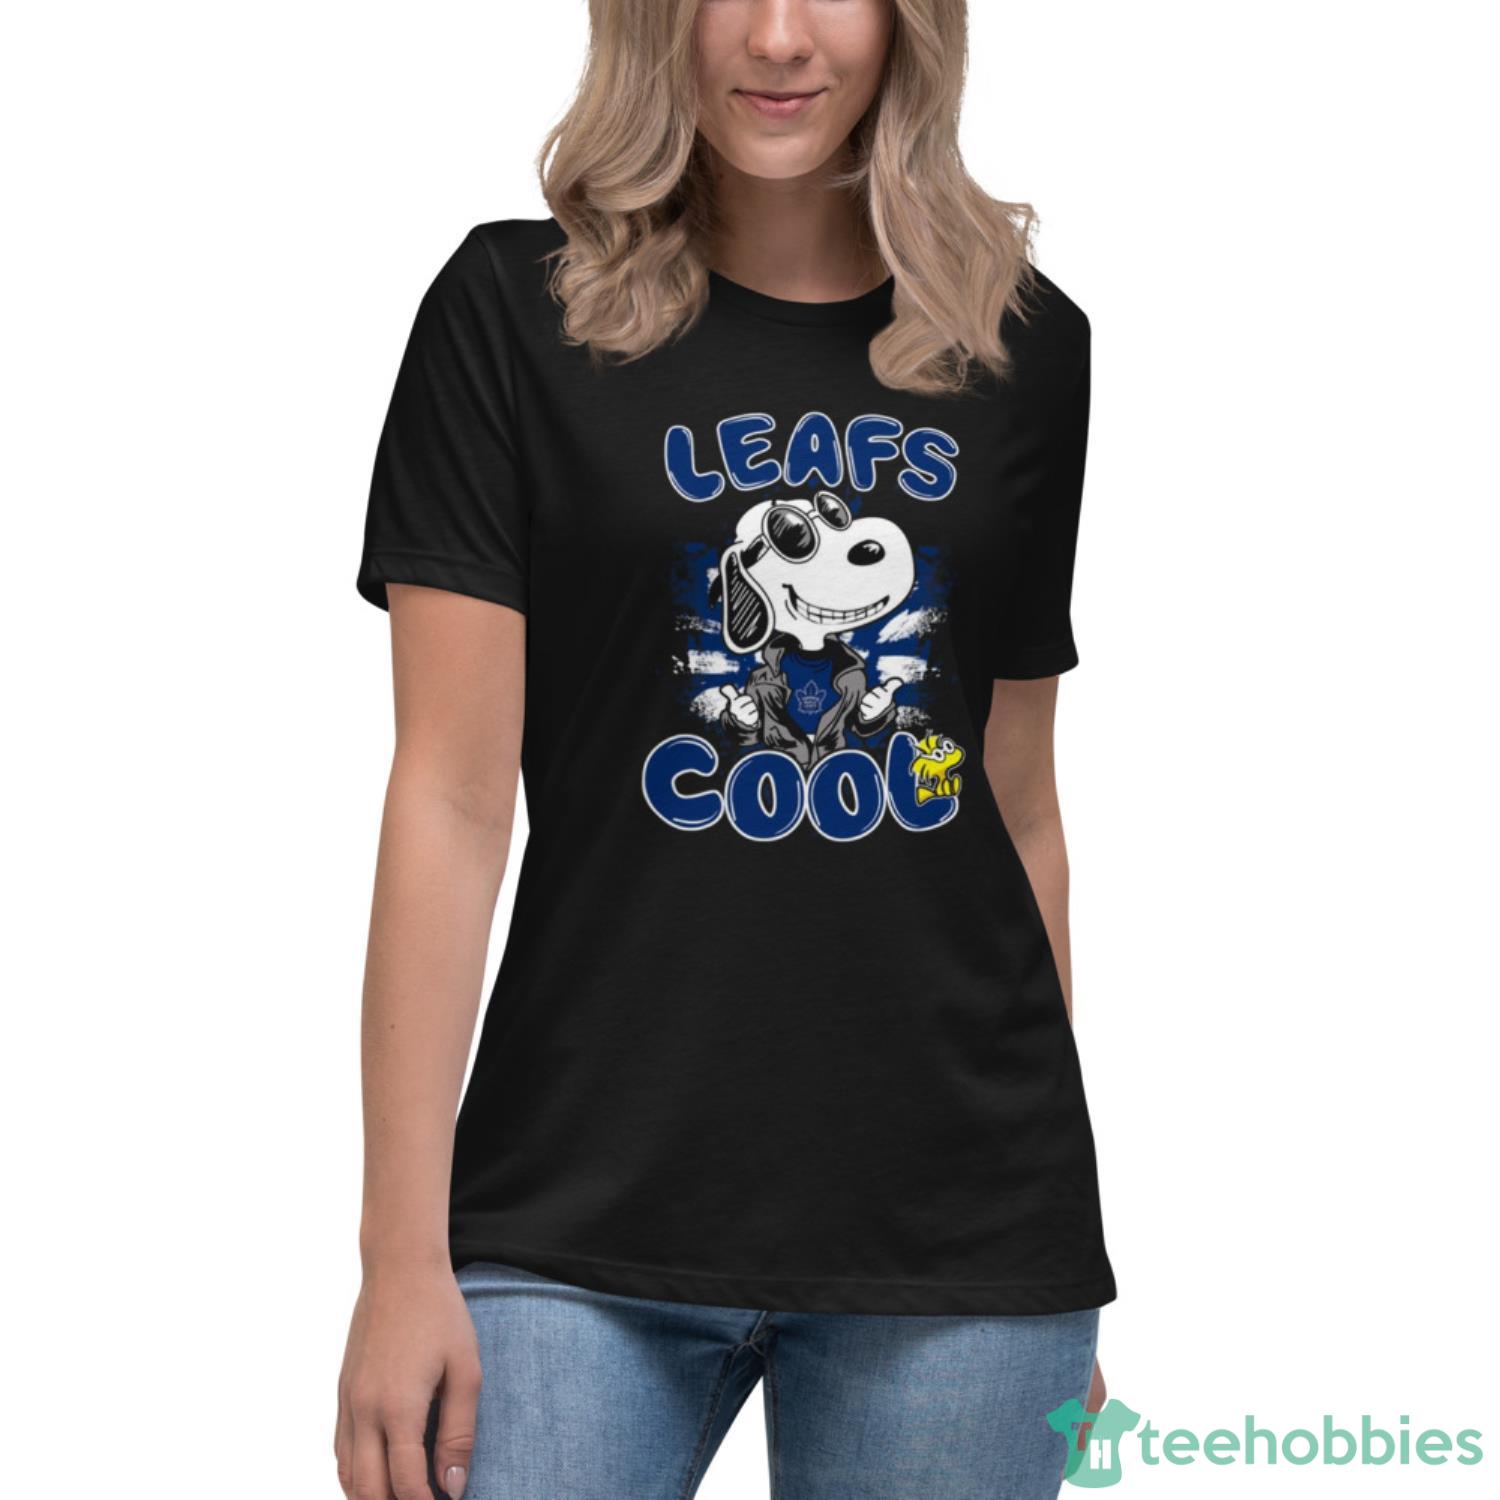 NHL Hockey Toronto Maple Leafs Cool Snoopy Shirt T Shirt - Womens Relaxed Short Sleeve Jersey Tee